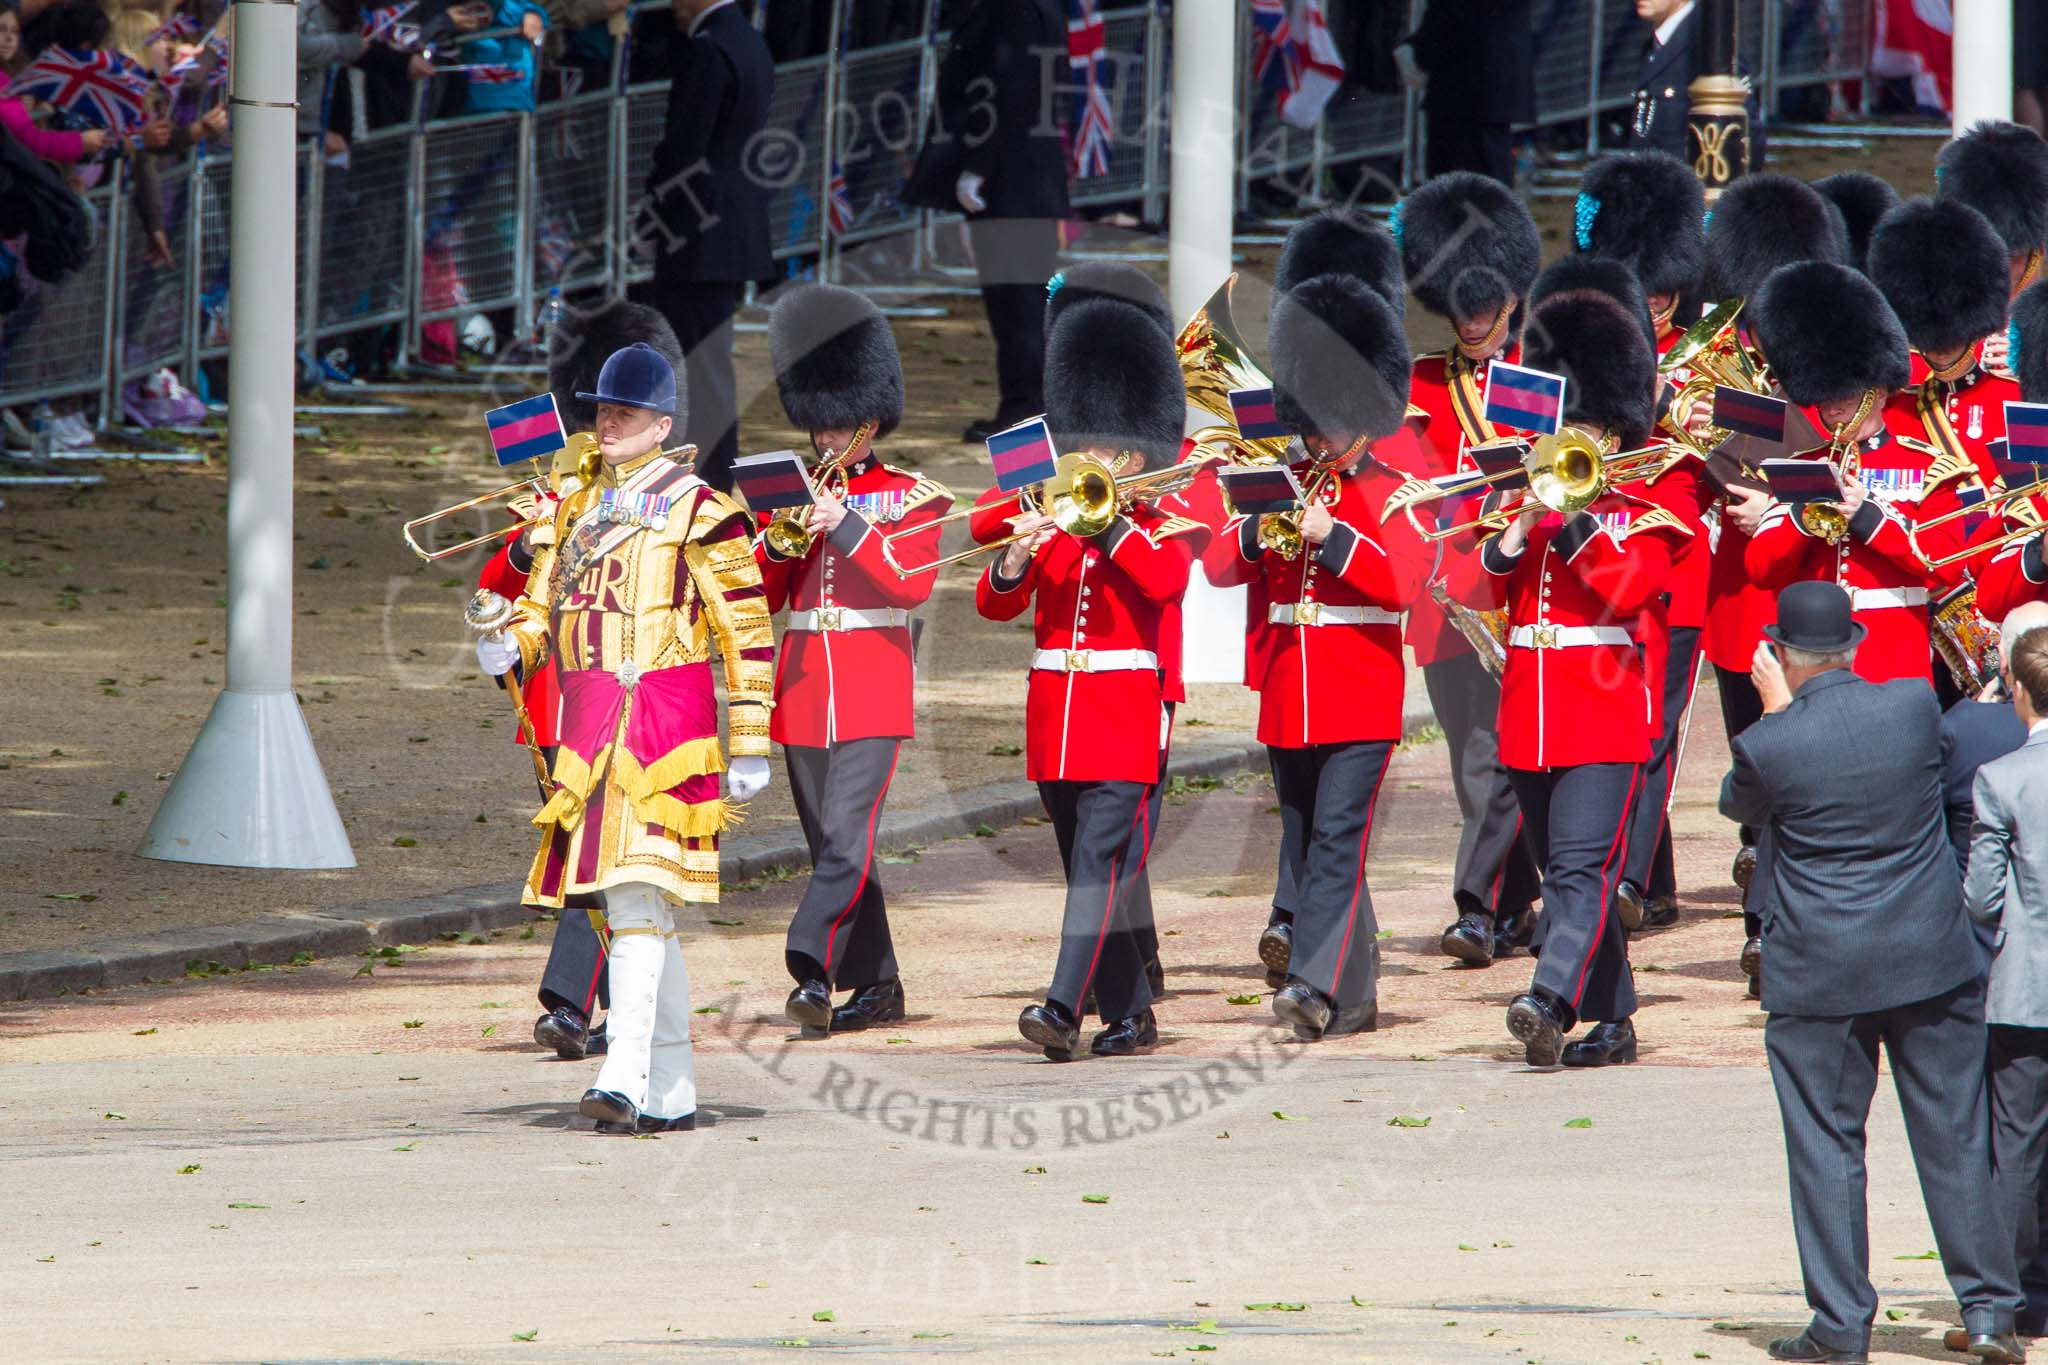 Trooping the Colour 2013: Drum Major Tony Taylor, Coldstream Guards, leading the second band to arrive at Horse Guards Parade, the Band of the Irish Guards. Image #50, 15 June 2013 10:14 Horse Guards Parade, London, UK